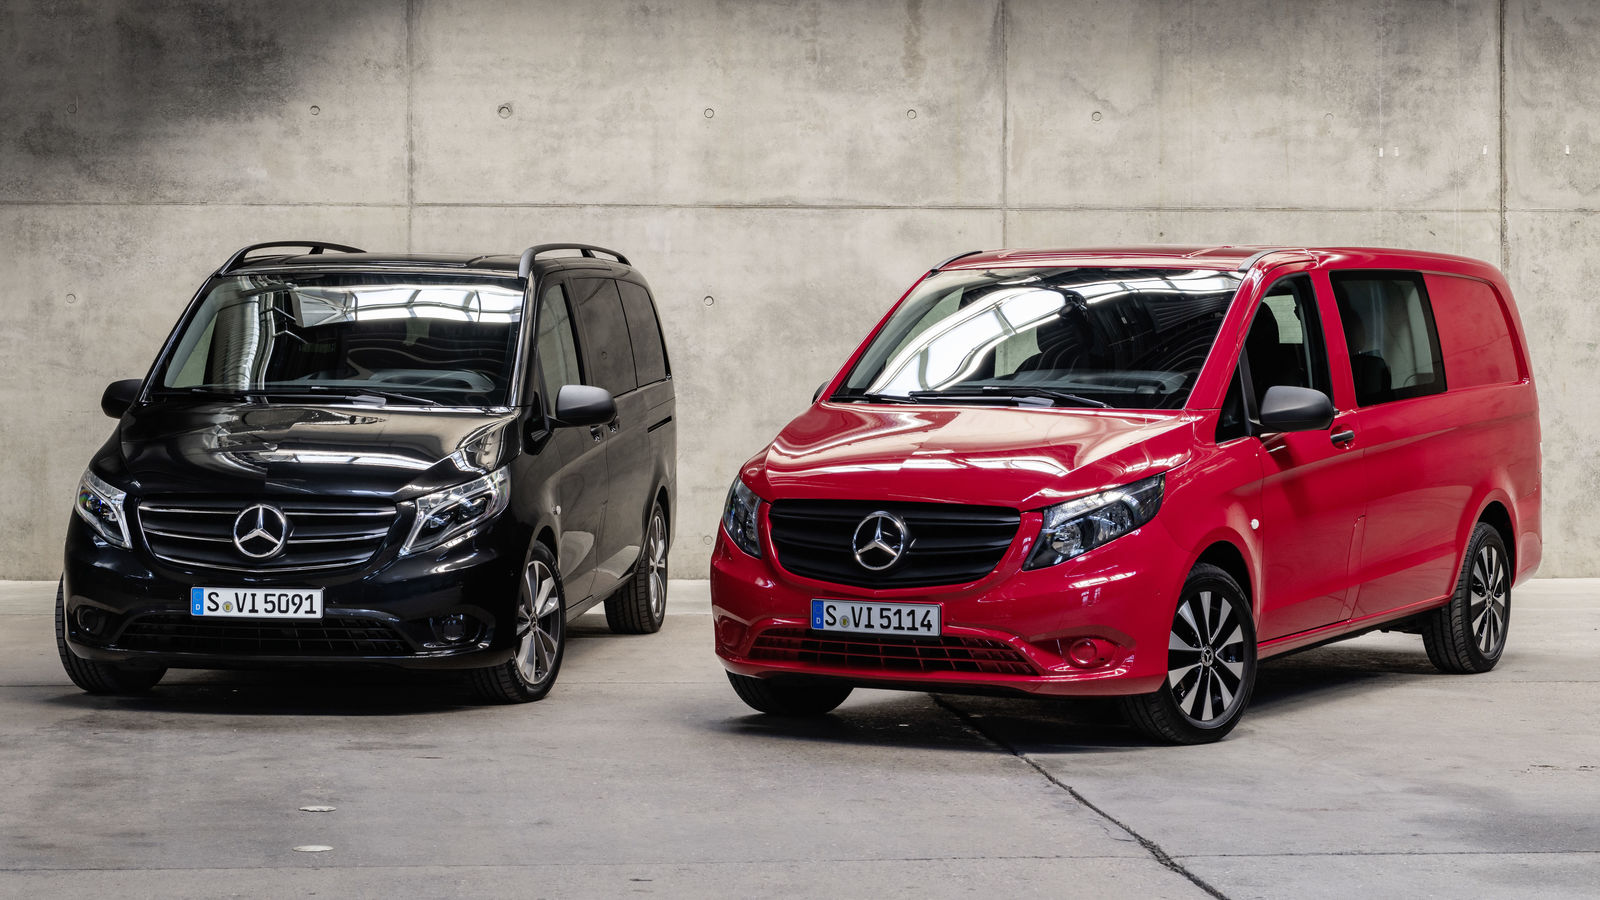 The Mercedes Vito Sport Line Isn't The AMG Van Of Your Dreams